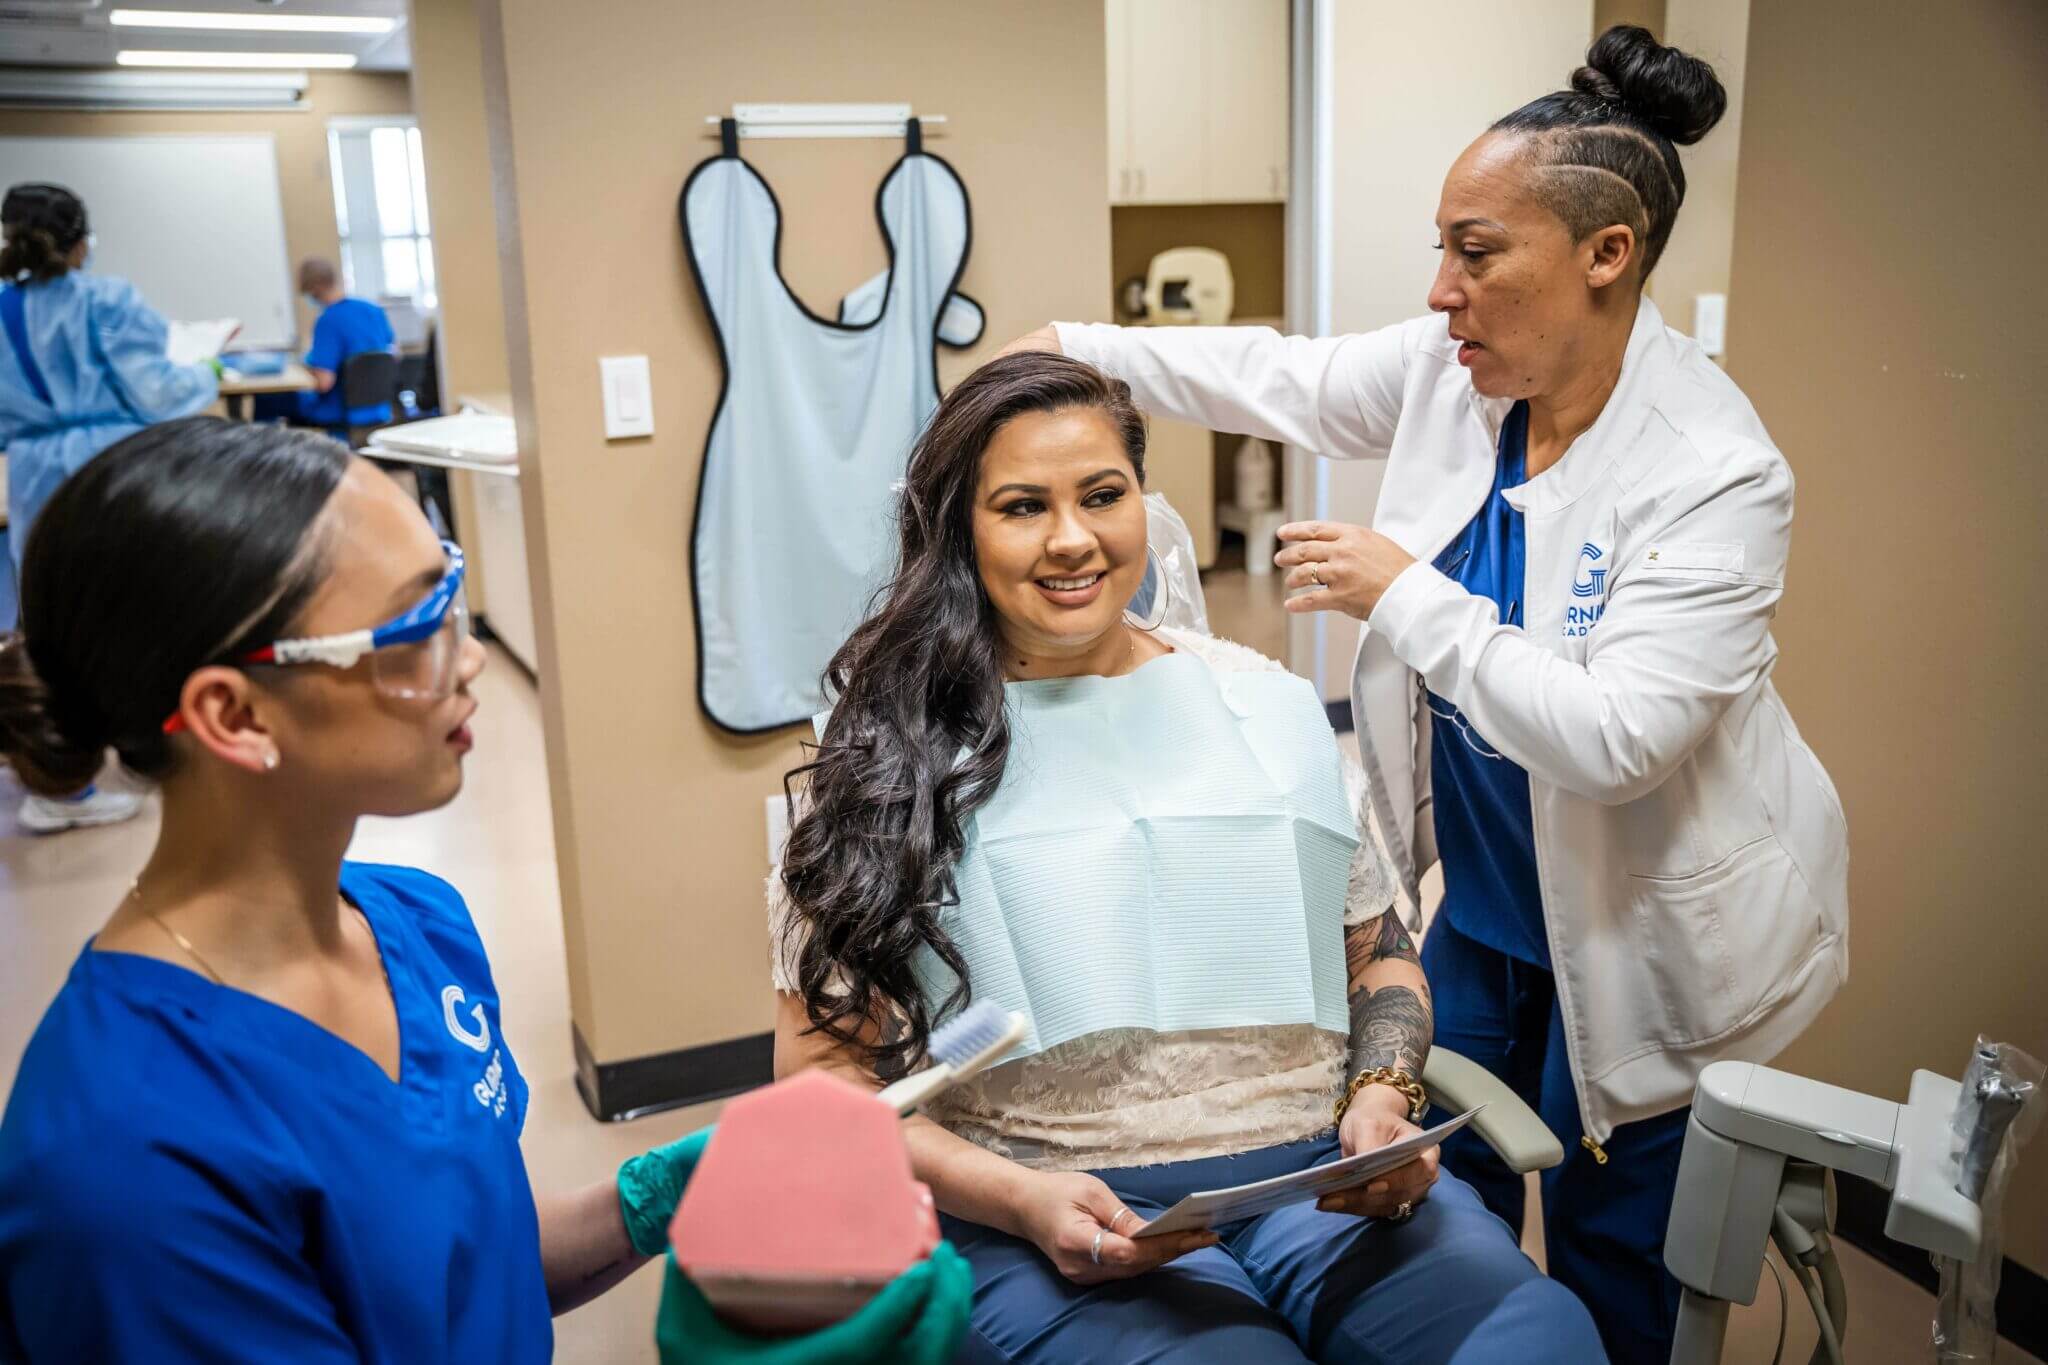 Find a Future of Smiles as a Dental Assistant - Front Office Duties | Gurnick Academy of Medical Arts